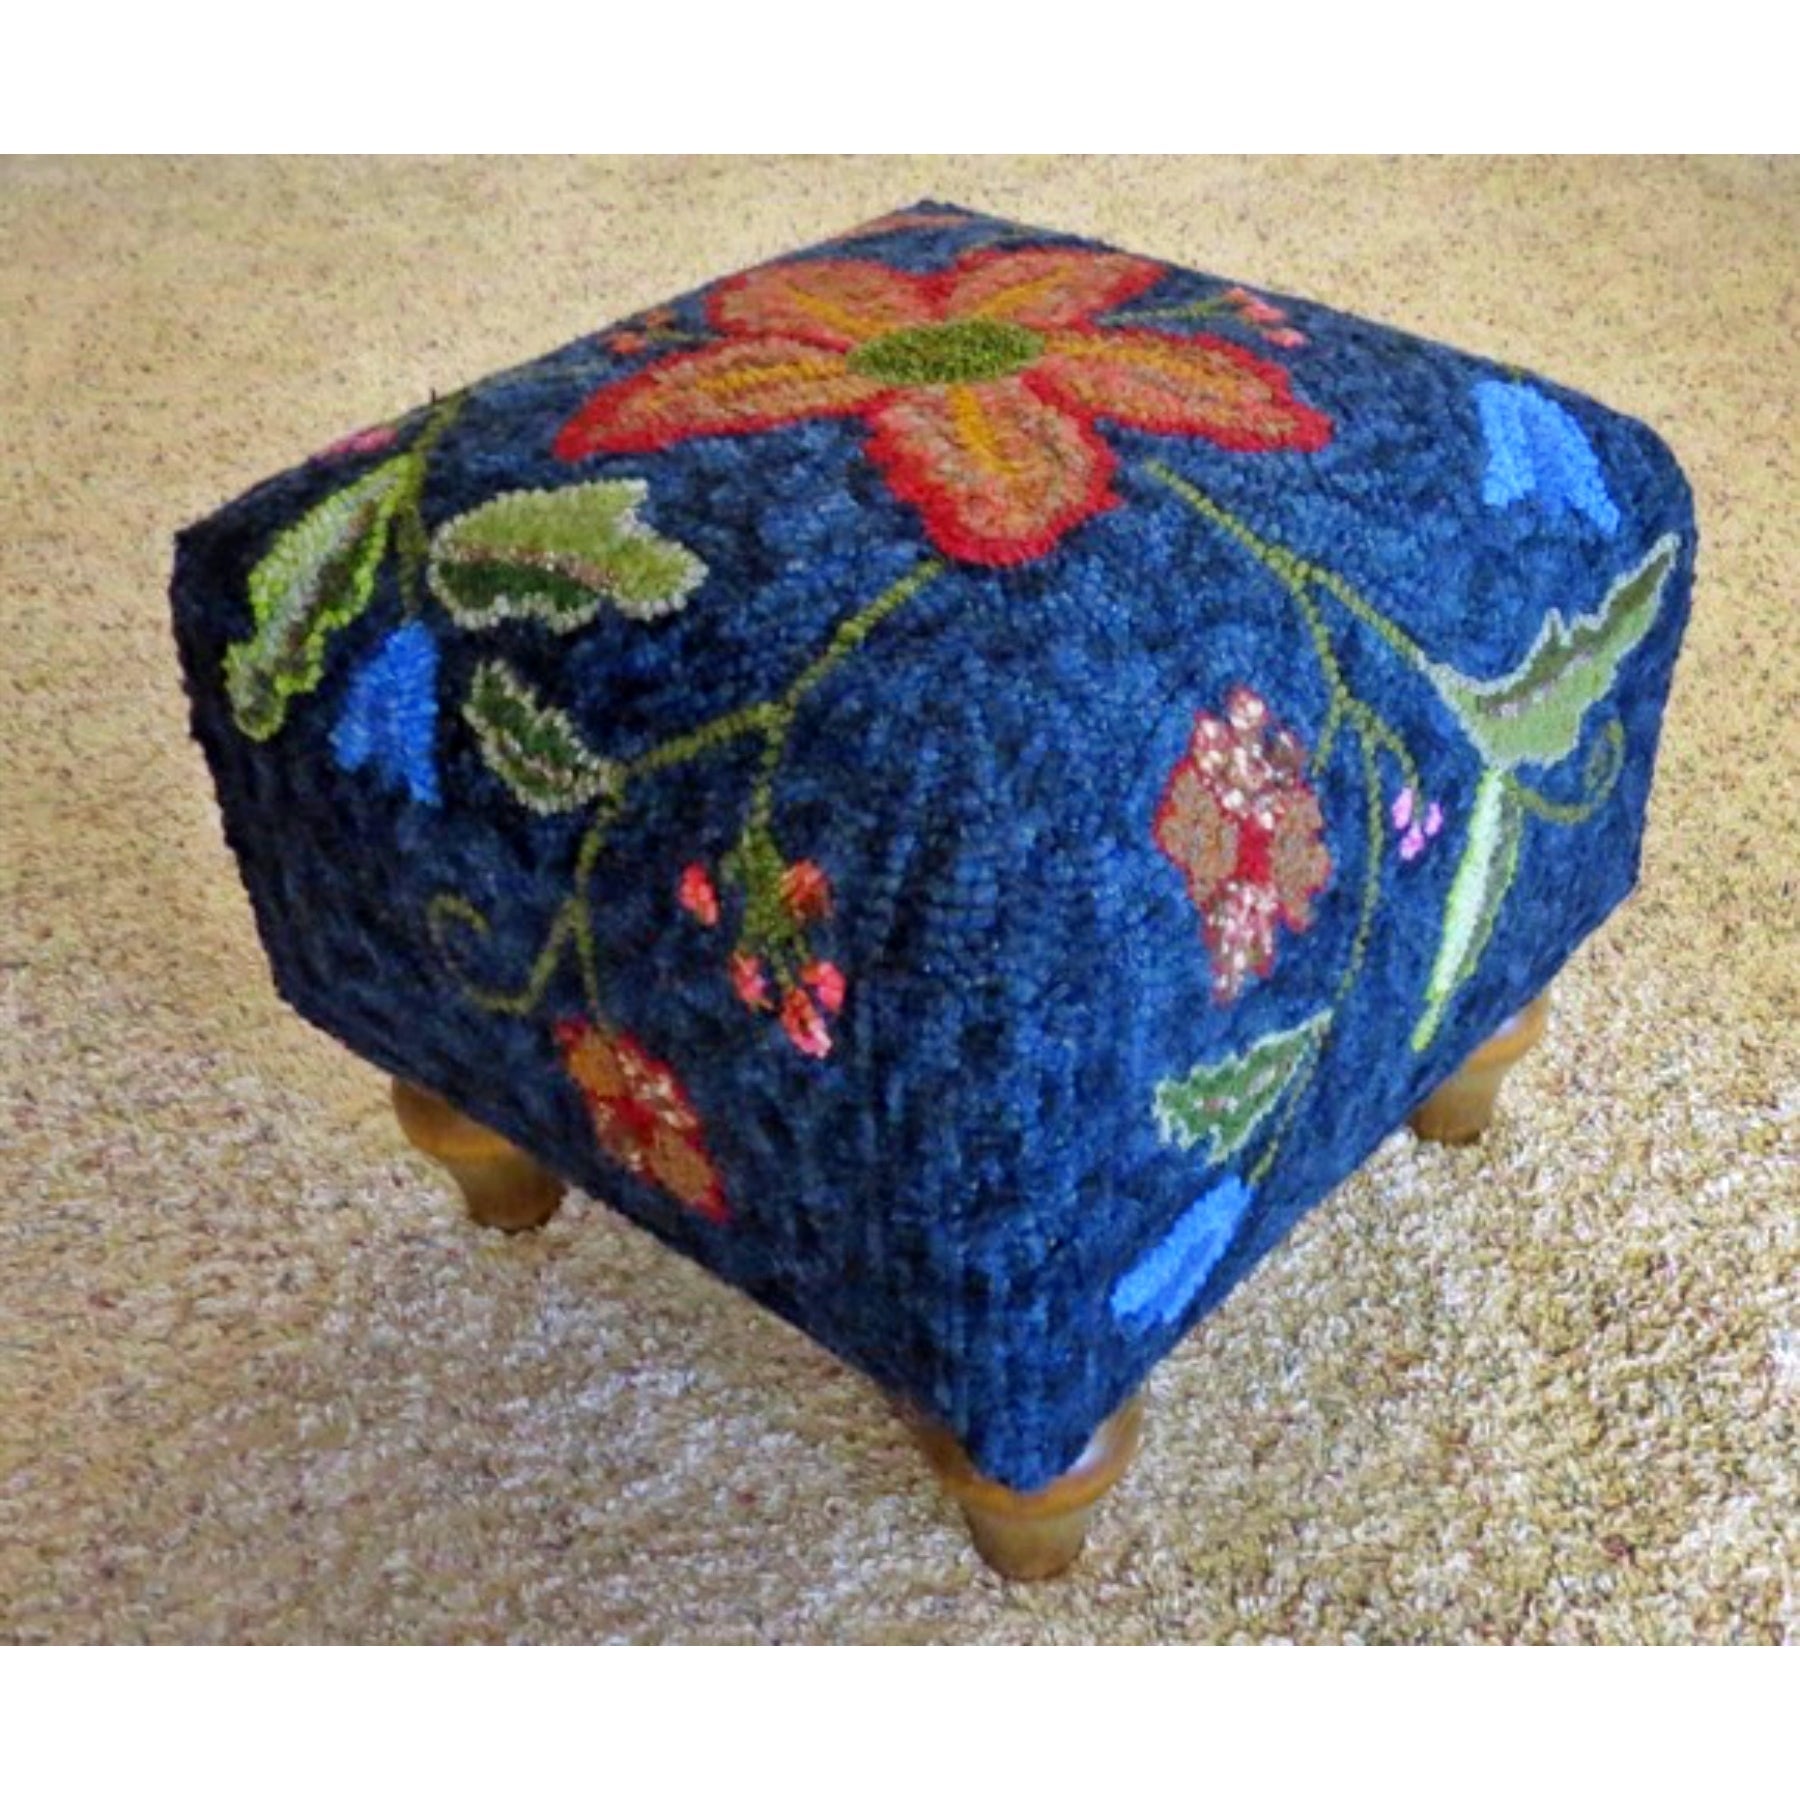 Crewel - Square Footstool Pattern, rug hooked by Patty Tyrrell